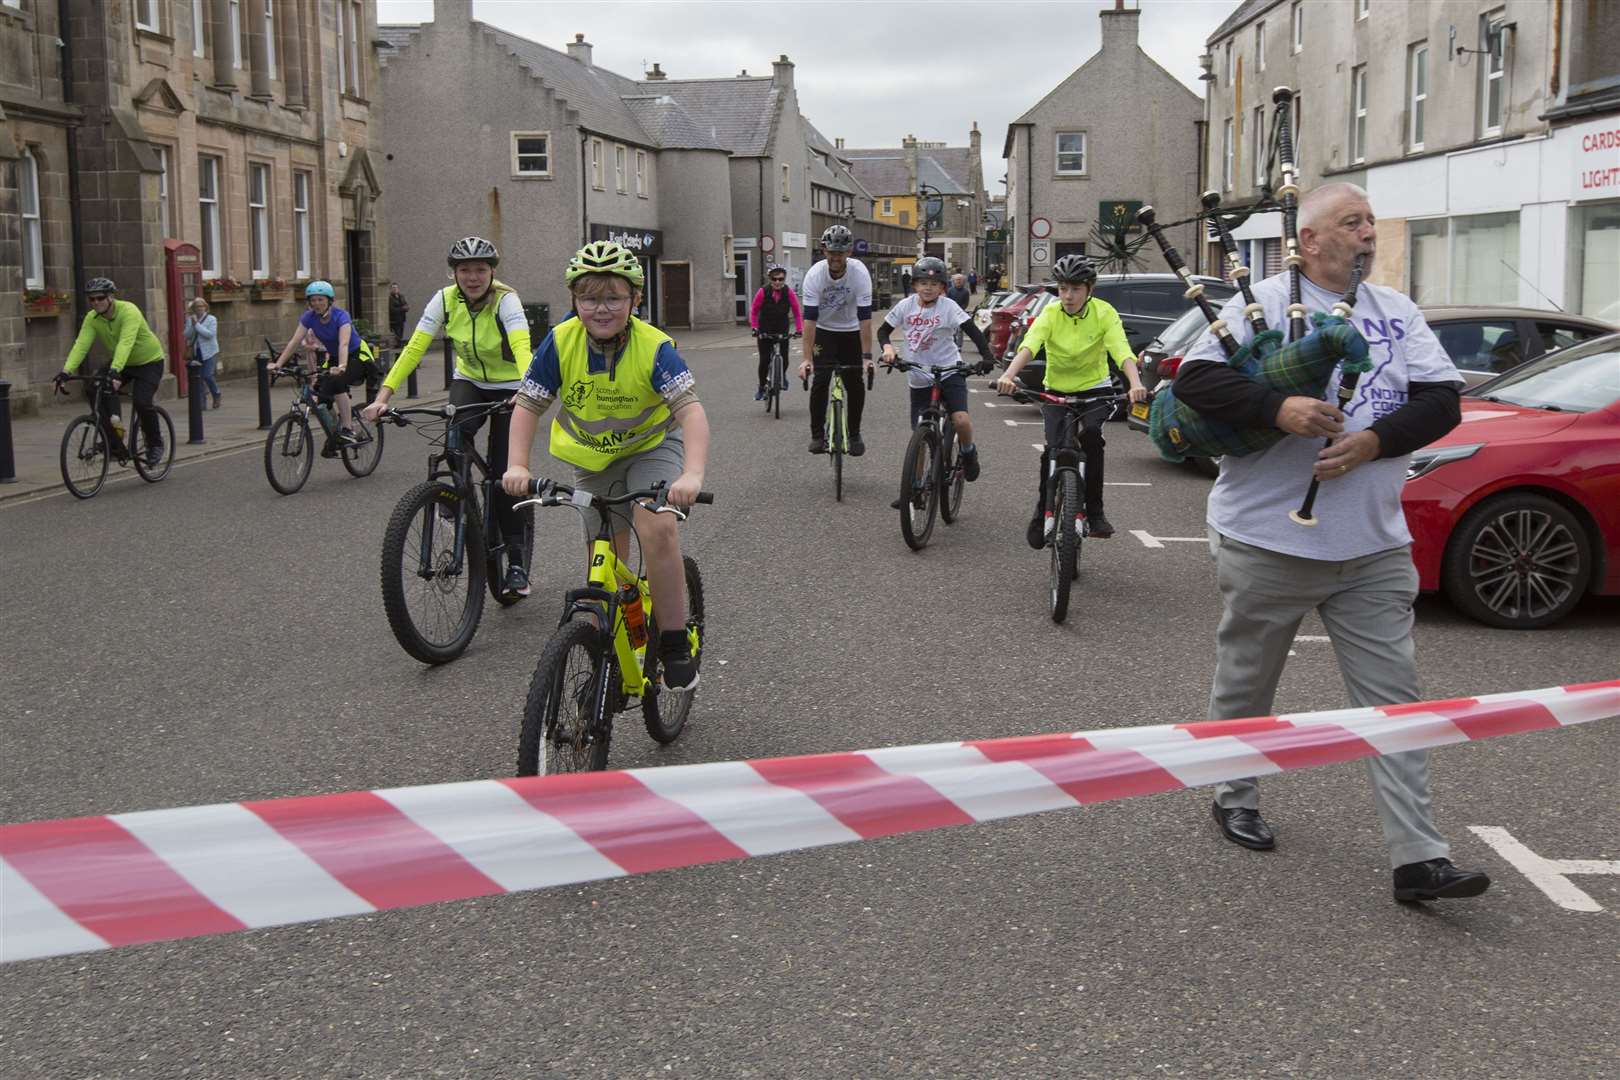 Eight-year-old Aidan Macgruer, followed by family and supporters, is piped towards the finish line in Thurso by his grandad, Willie Larnach. Picture: Robert MacDonald/Northern Studios